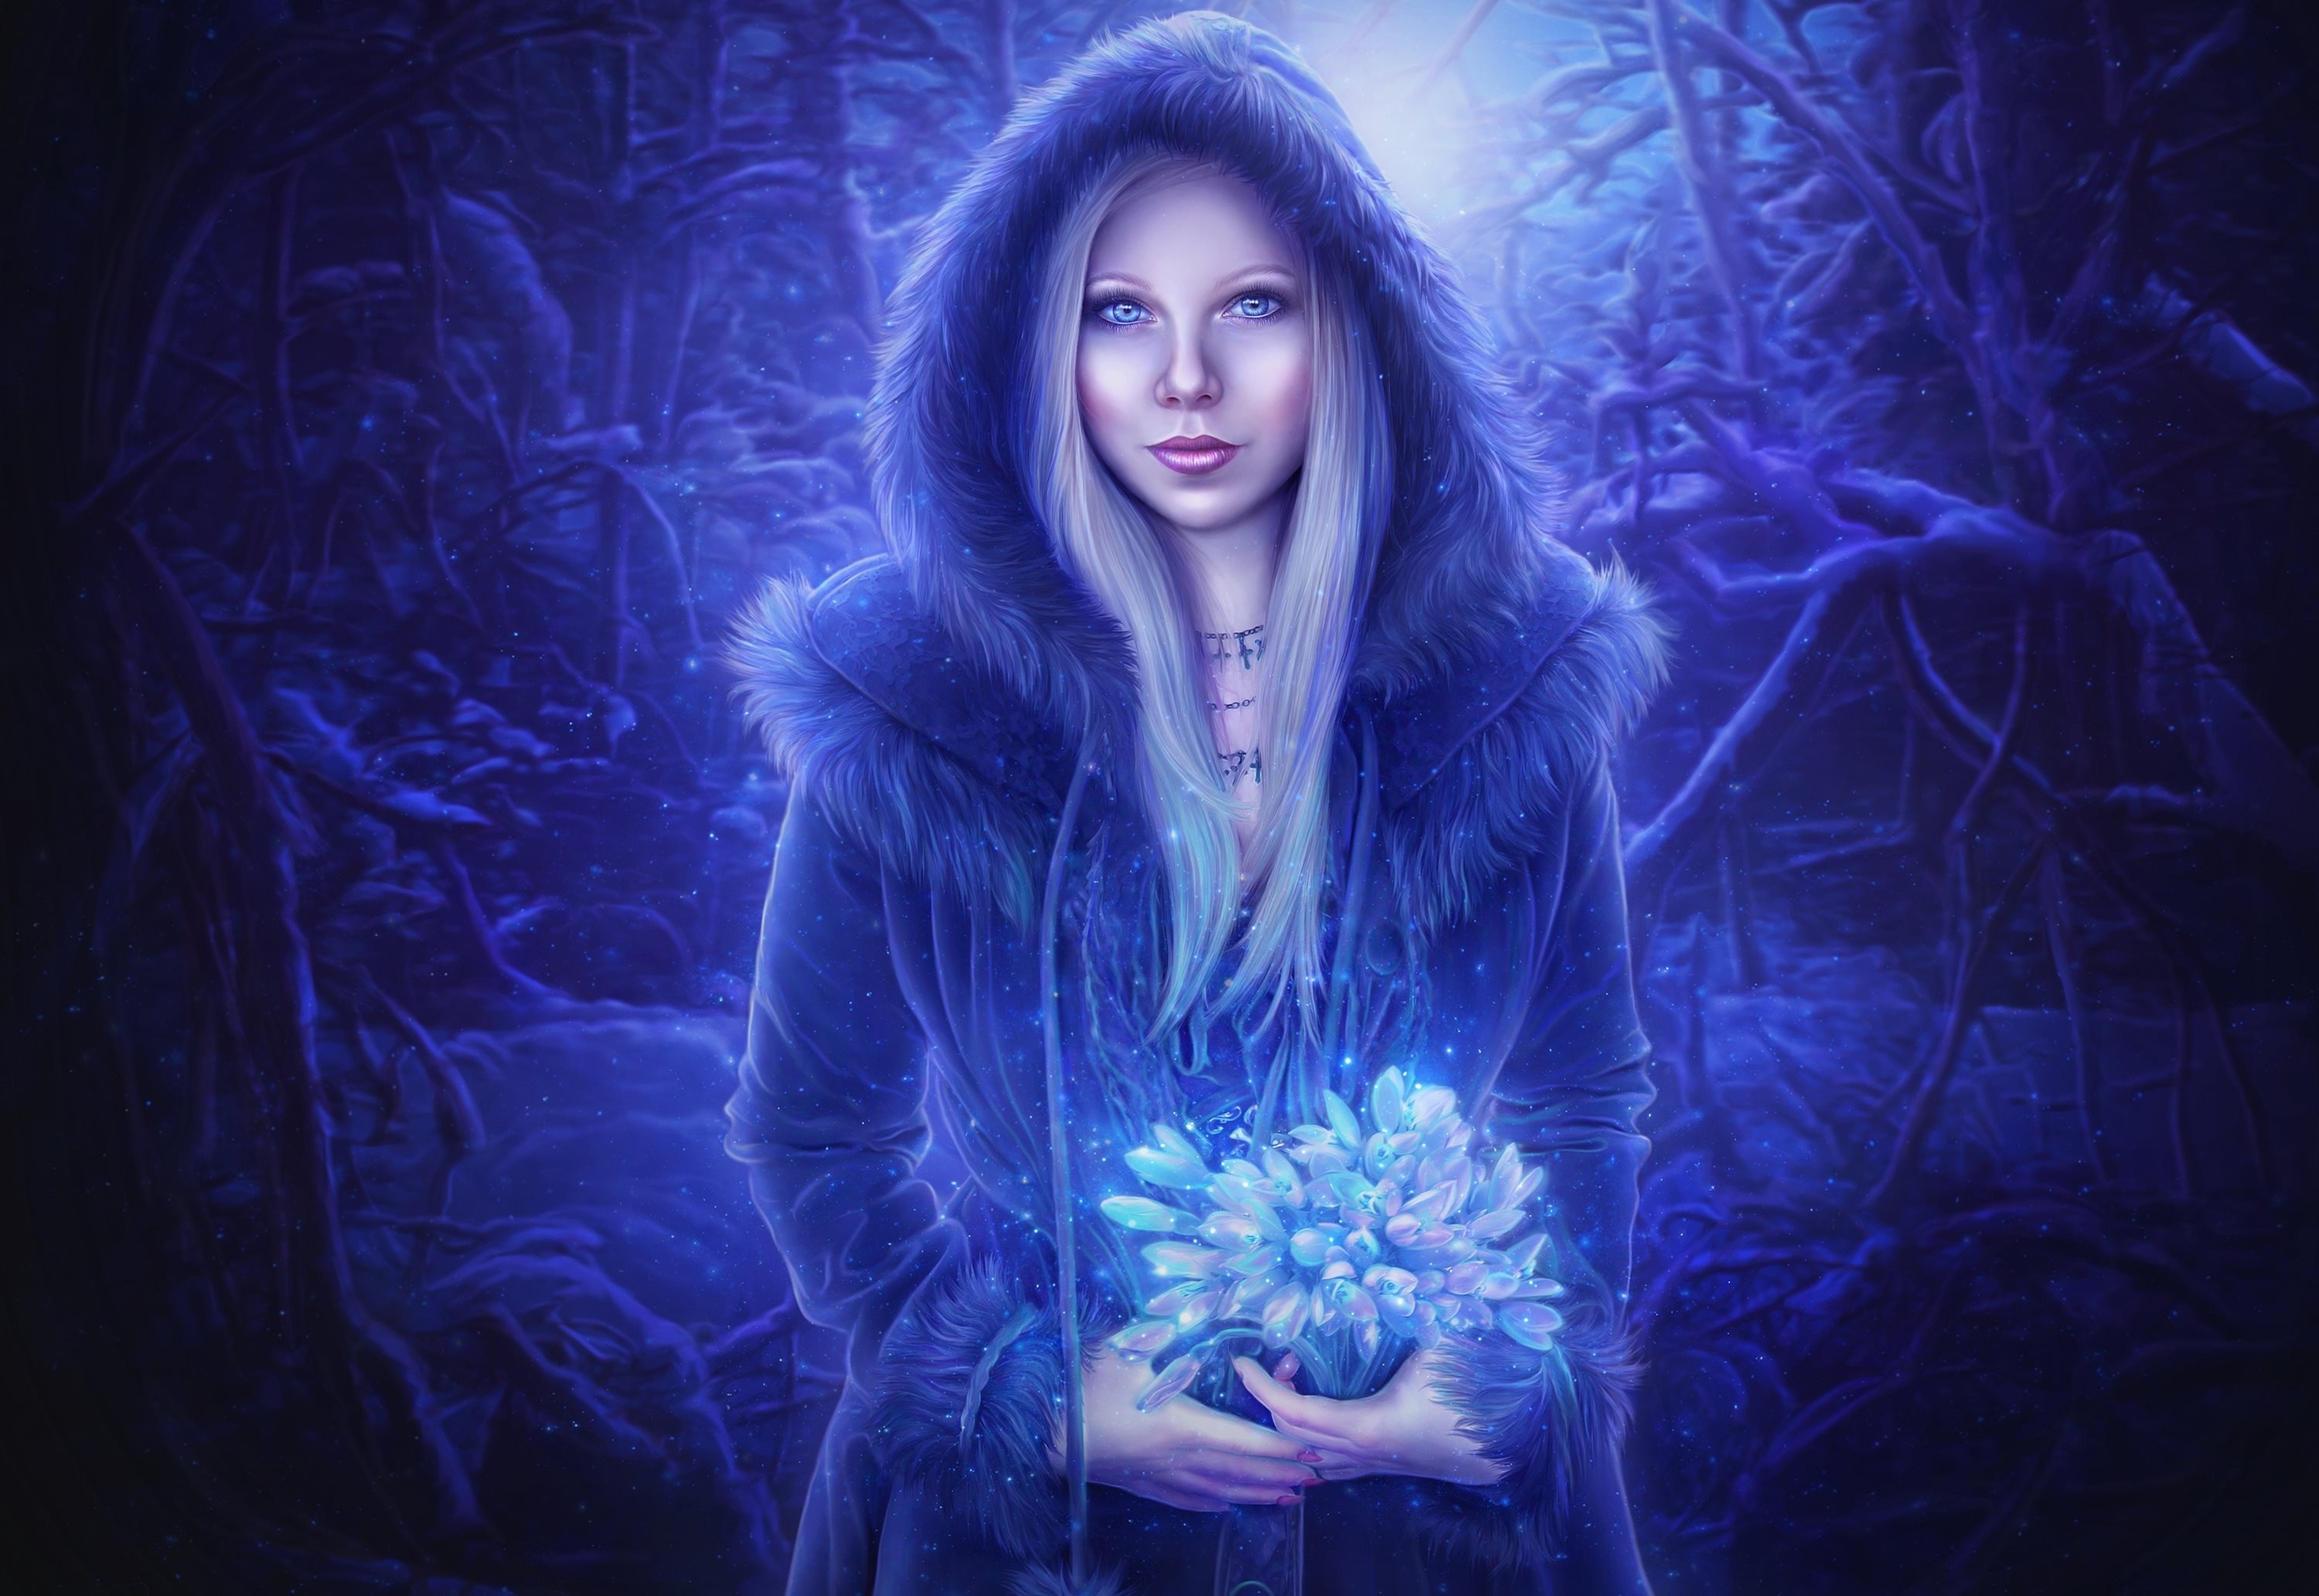 Woman in Winter Forest Holding Blue Flowers by IvannaDark